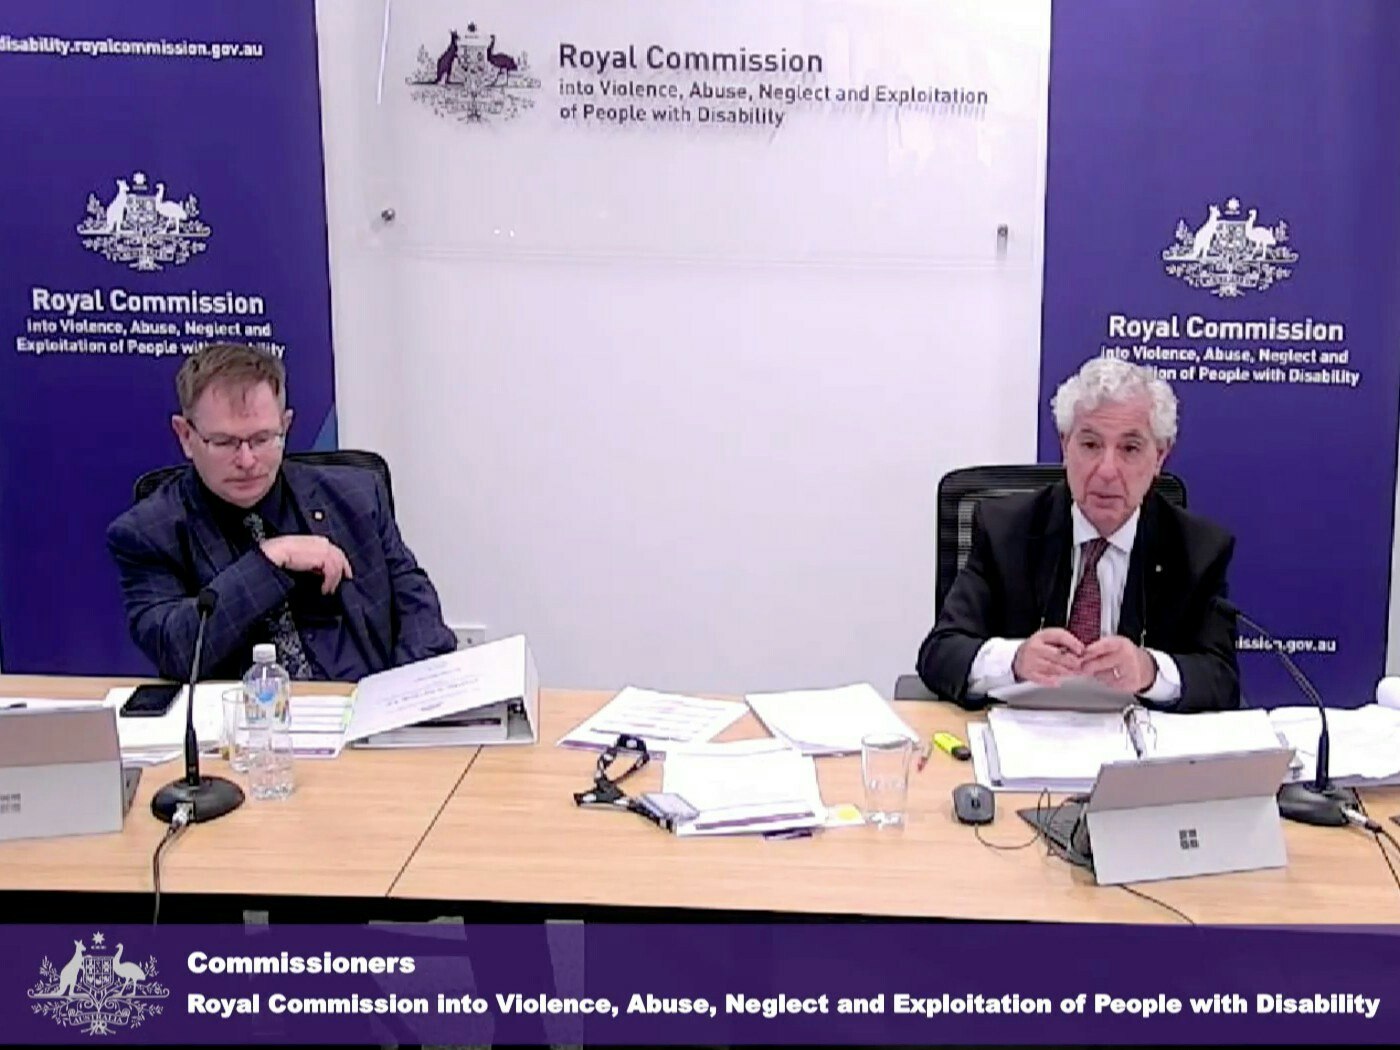 <p>The Royal Commission has been investigating the challenges faced by people with disability in finding and retaining employment in the latest public hearing. [Source: Disability Royal Commission]</p>
